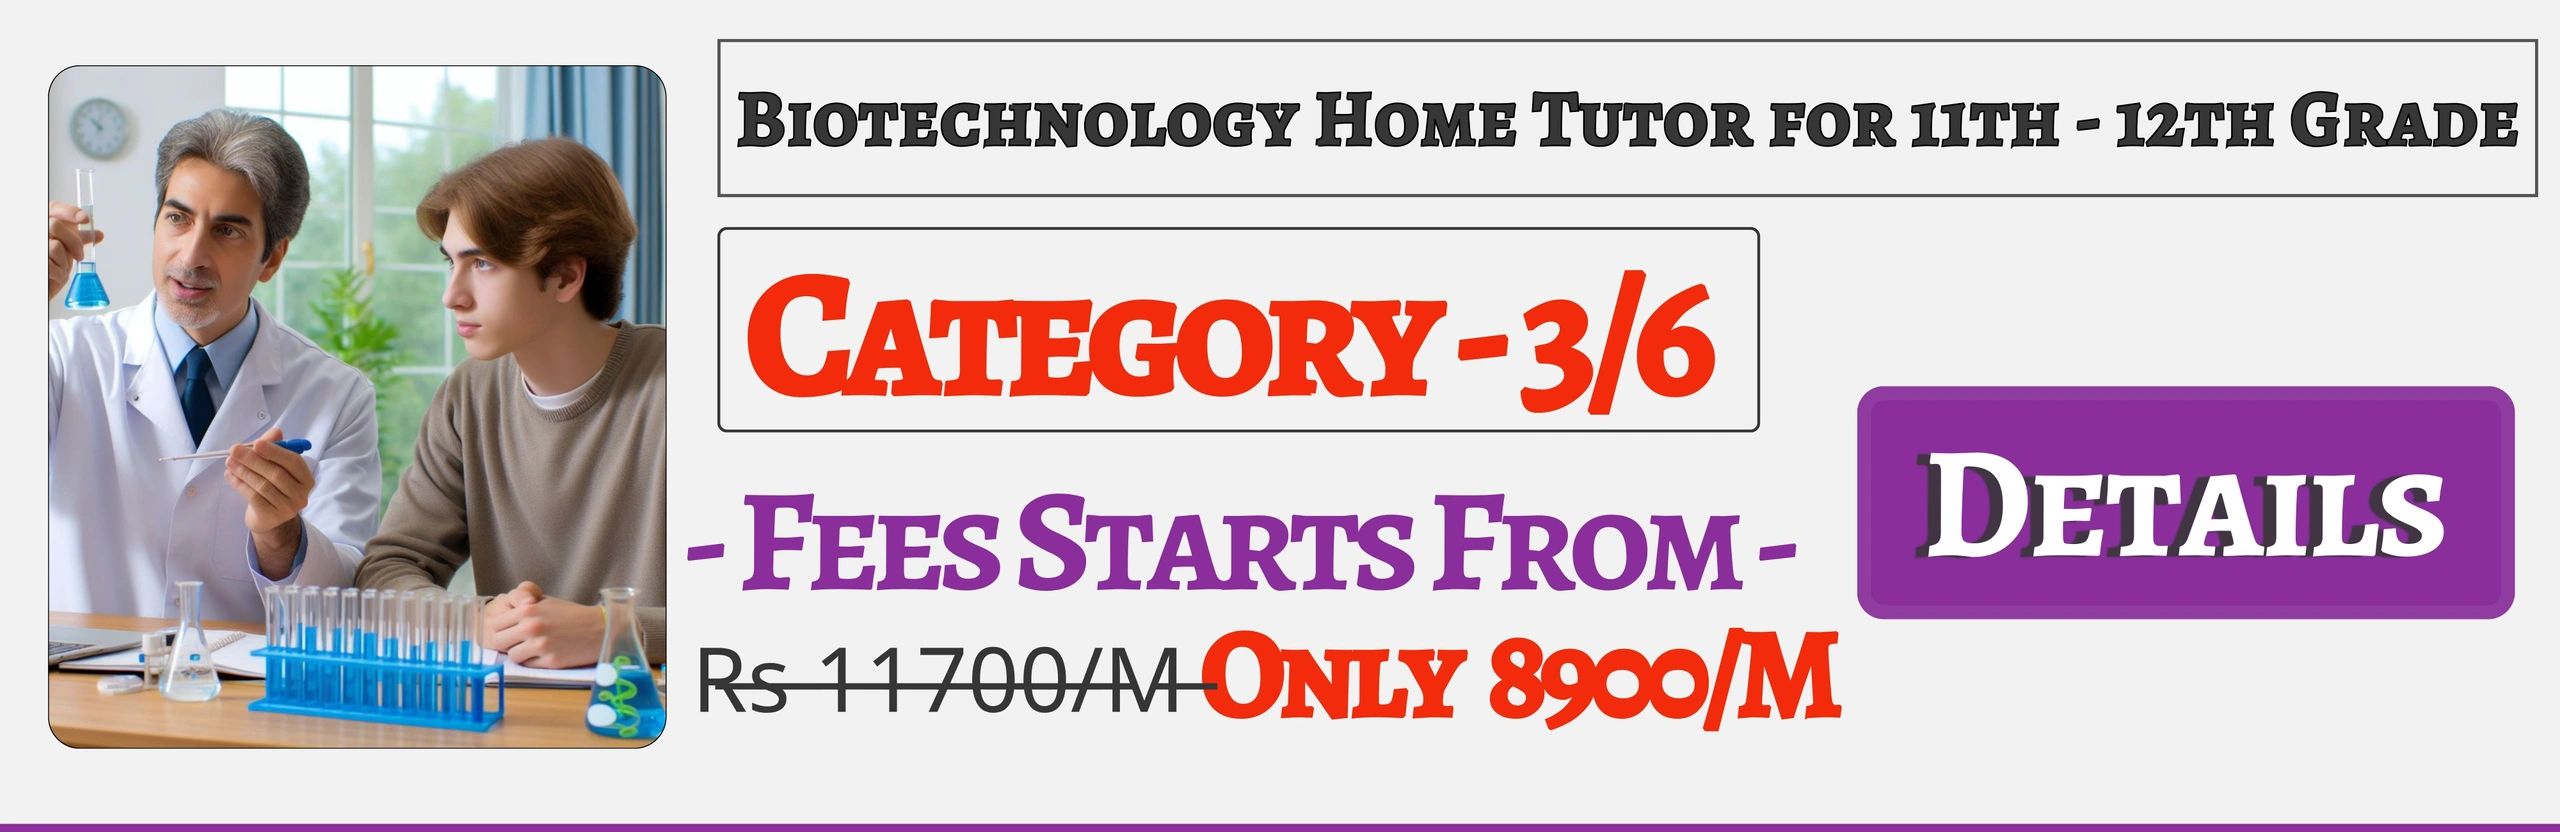 Book Best Nearby Biotechnology Home Tuition Tutors For 11th & 12th In Jaipur , Fees Only 8900/M